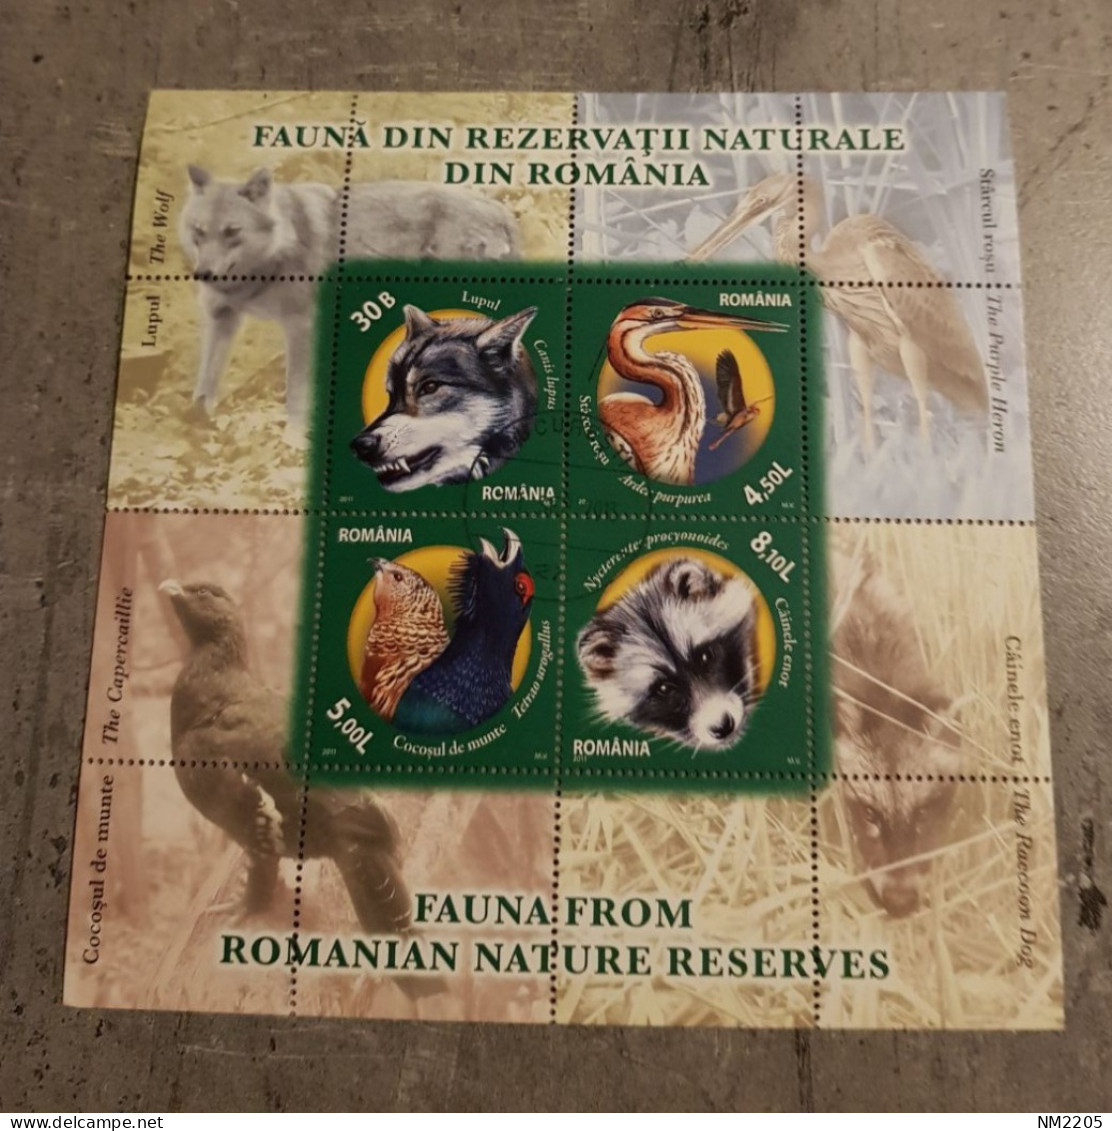 ROMANIA FAUNA FROM ROMANIAN NATURE RESERVES SHEET USED - Used Stamps